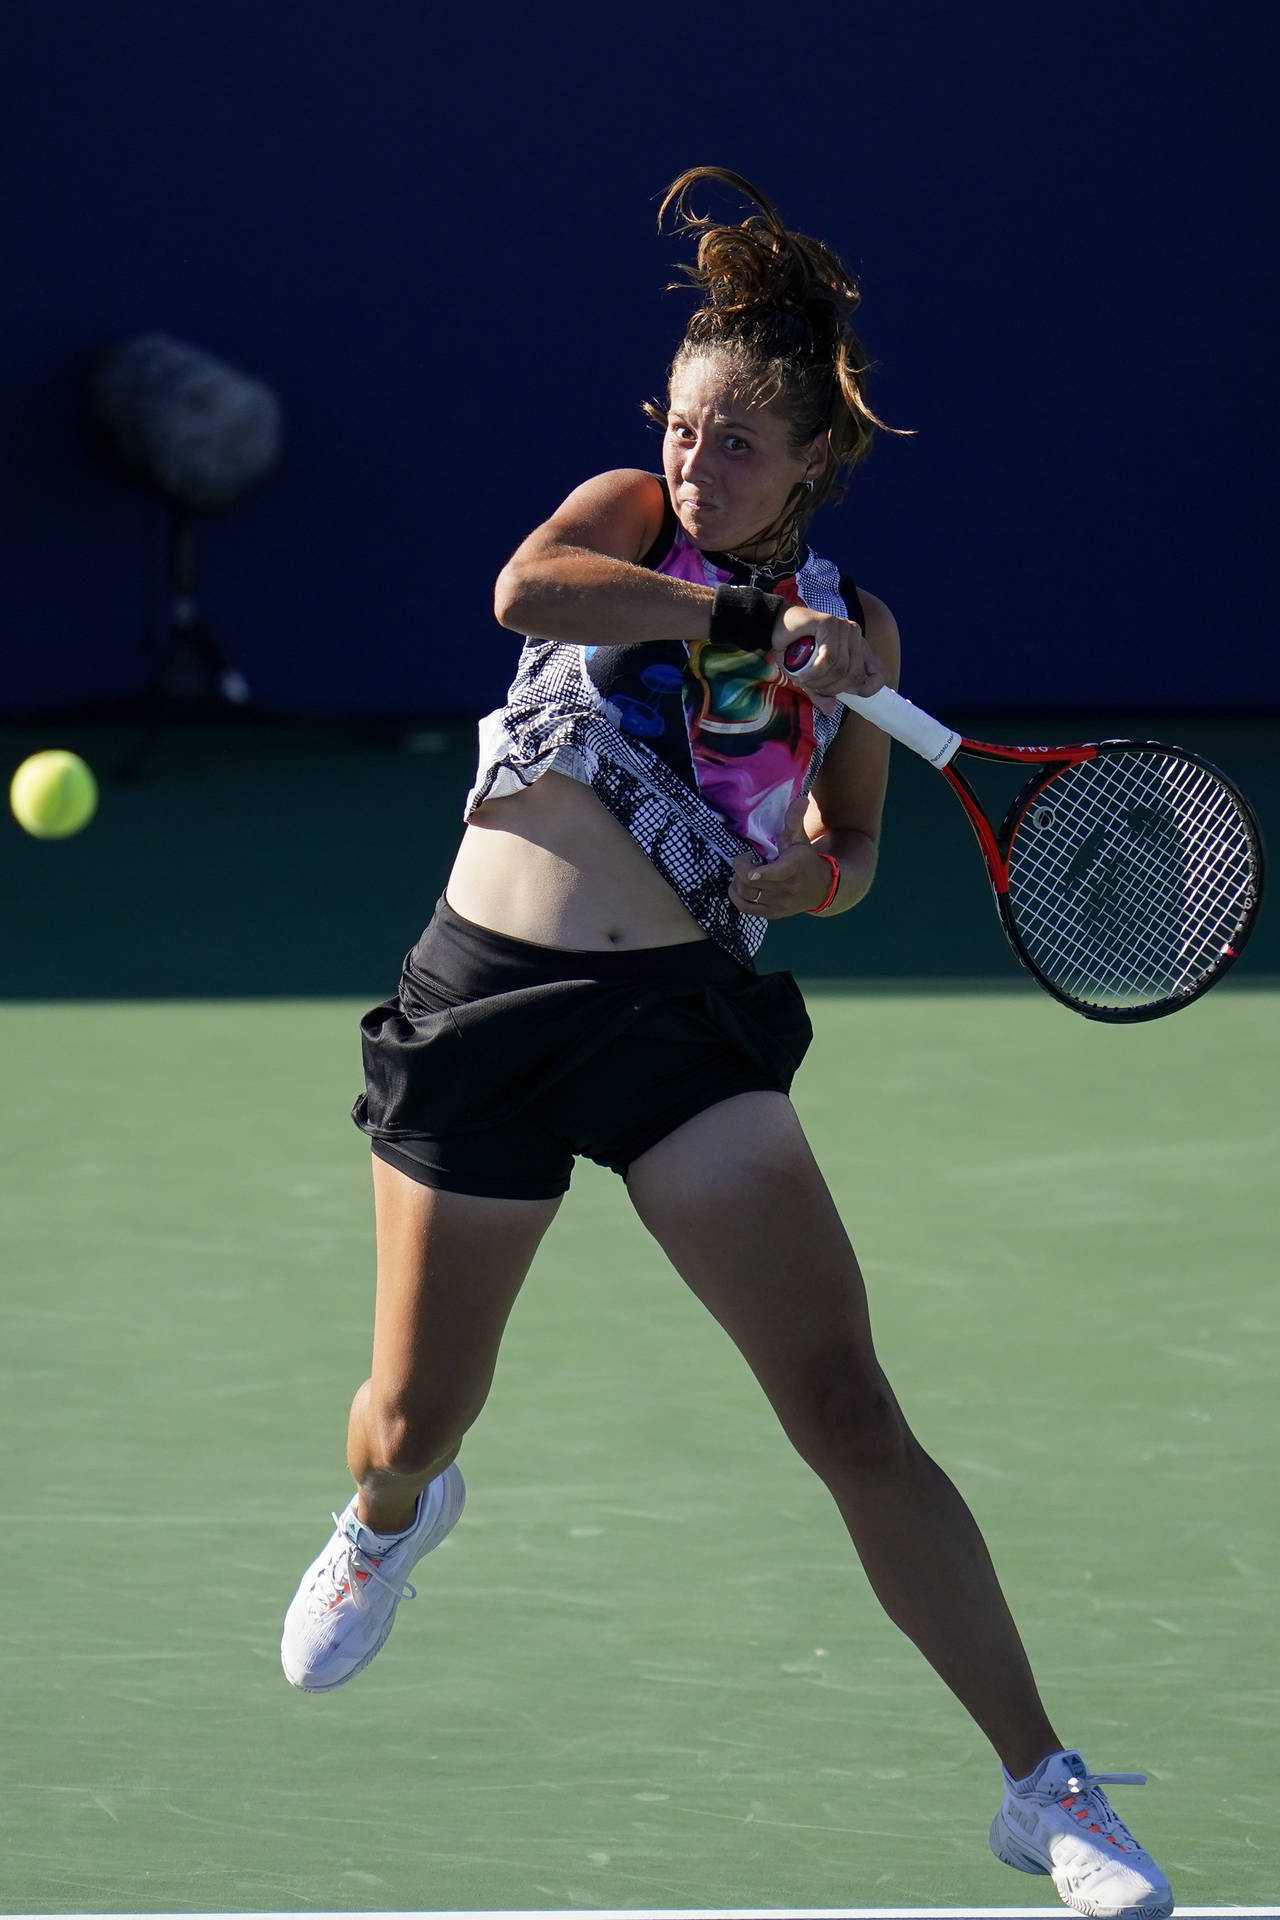 Daria Kasatkina delivers a powerful swing during a tennis match Wallpaper